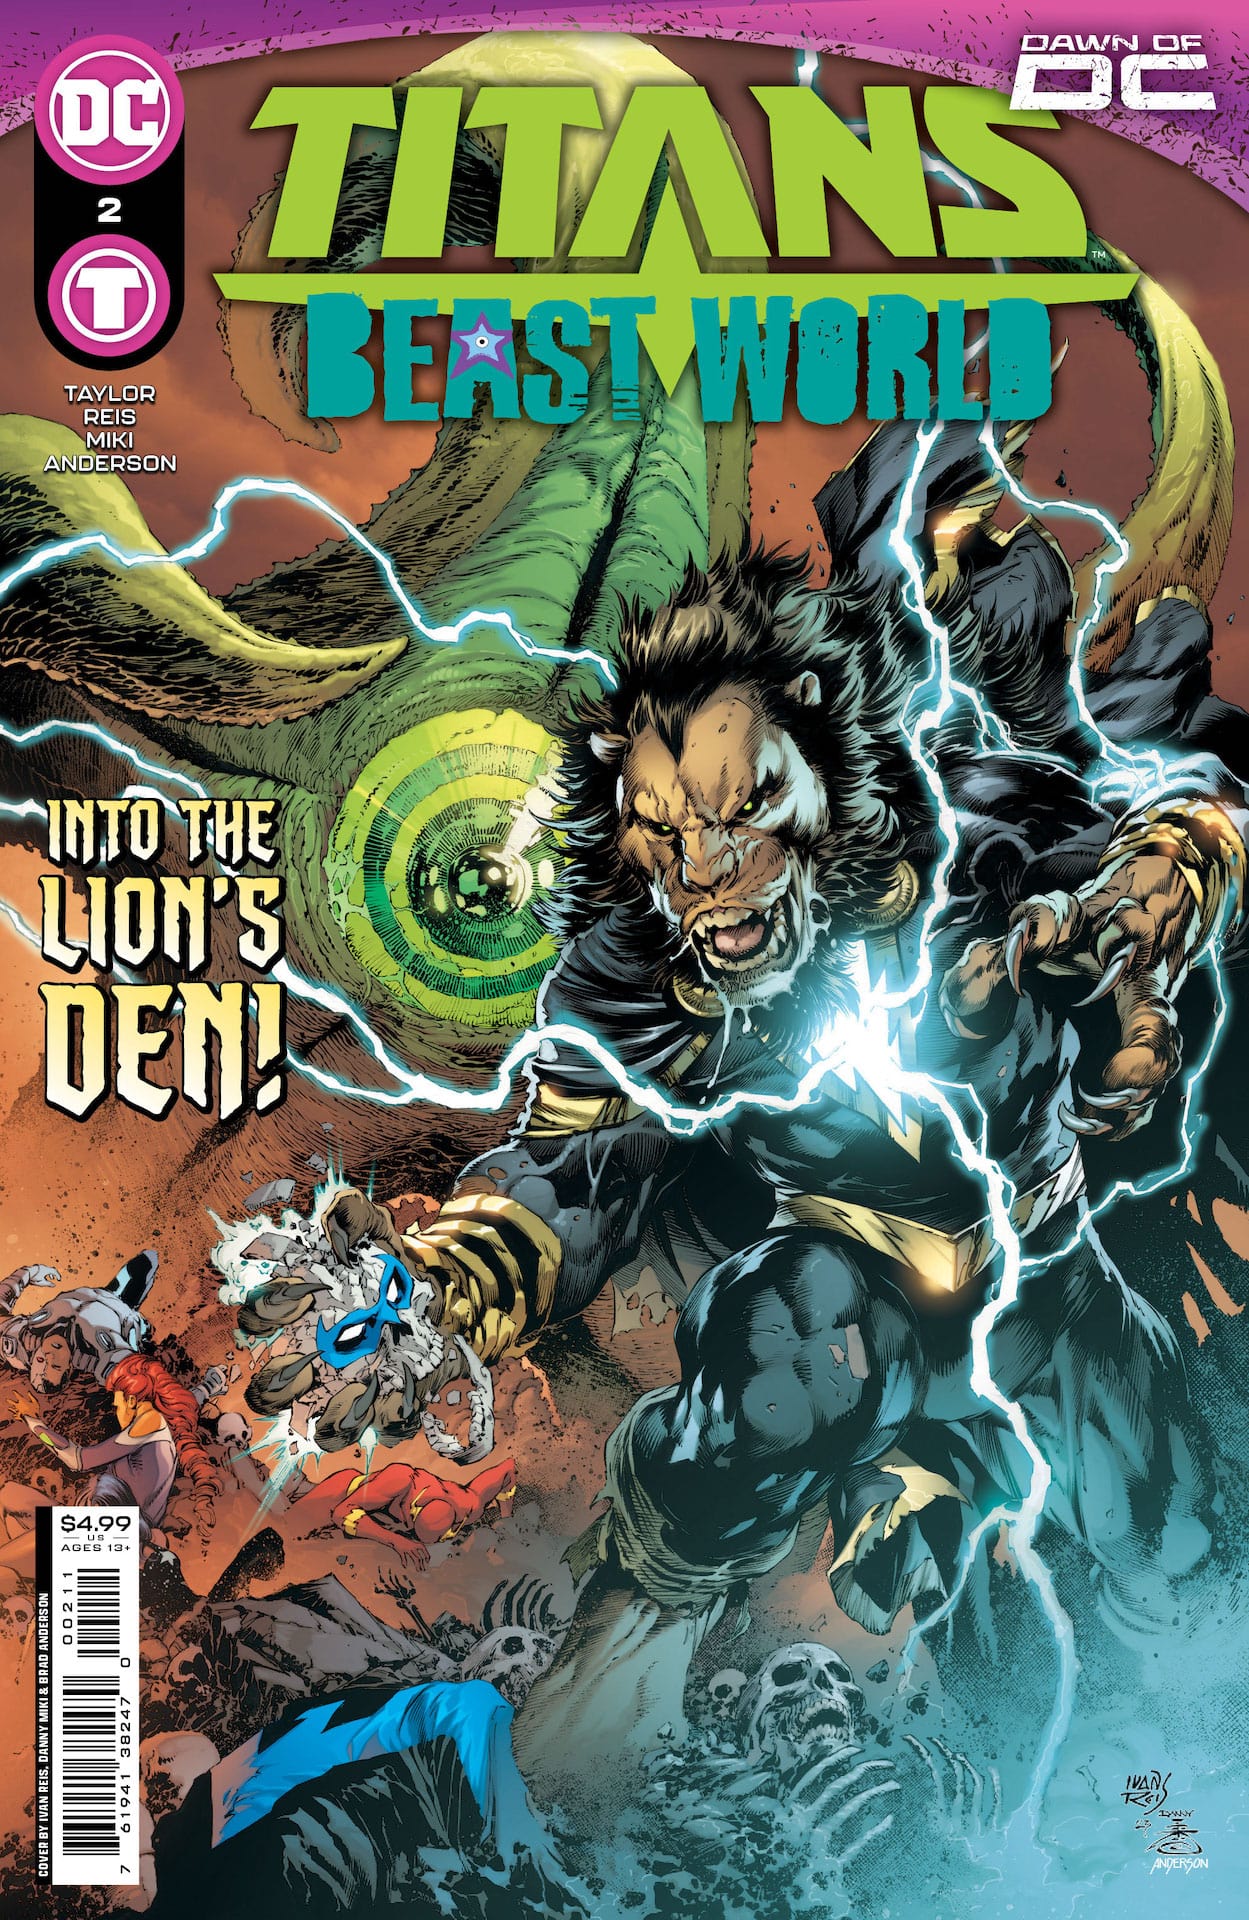 DC Preview: Titans: Beast World #2